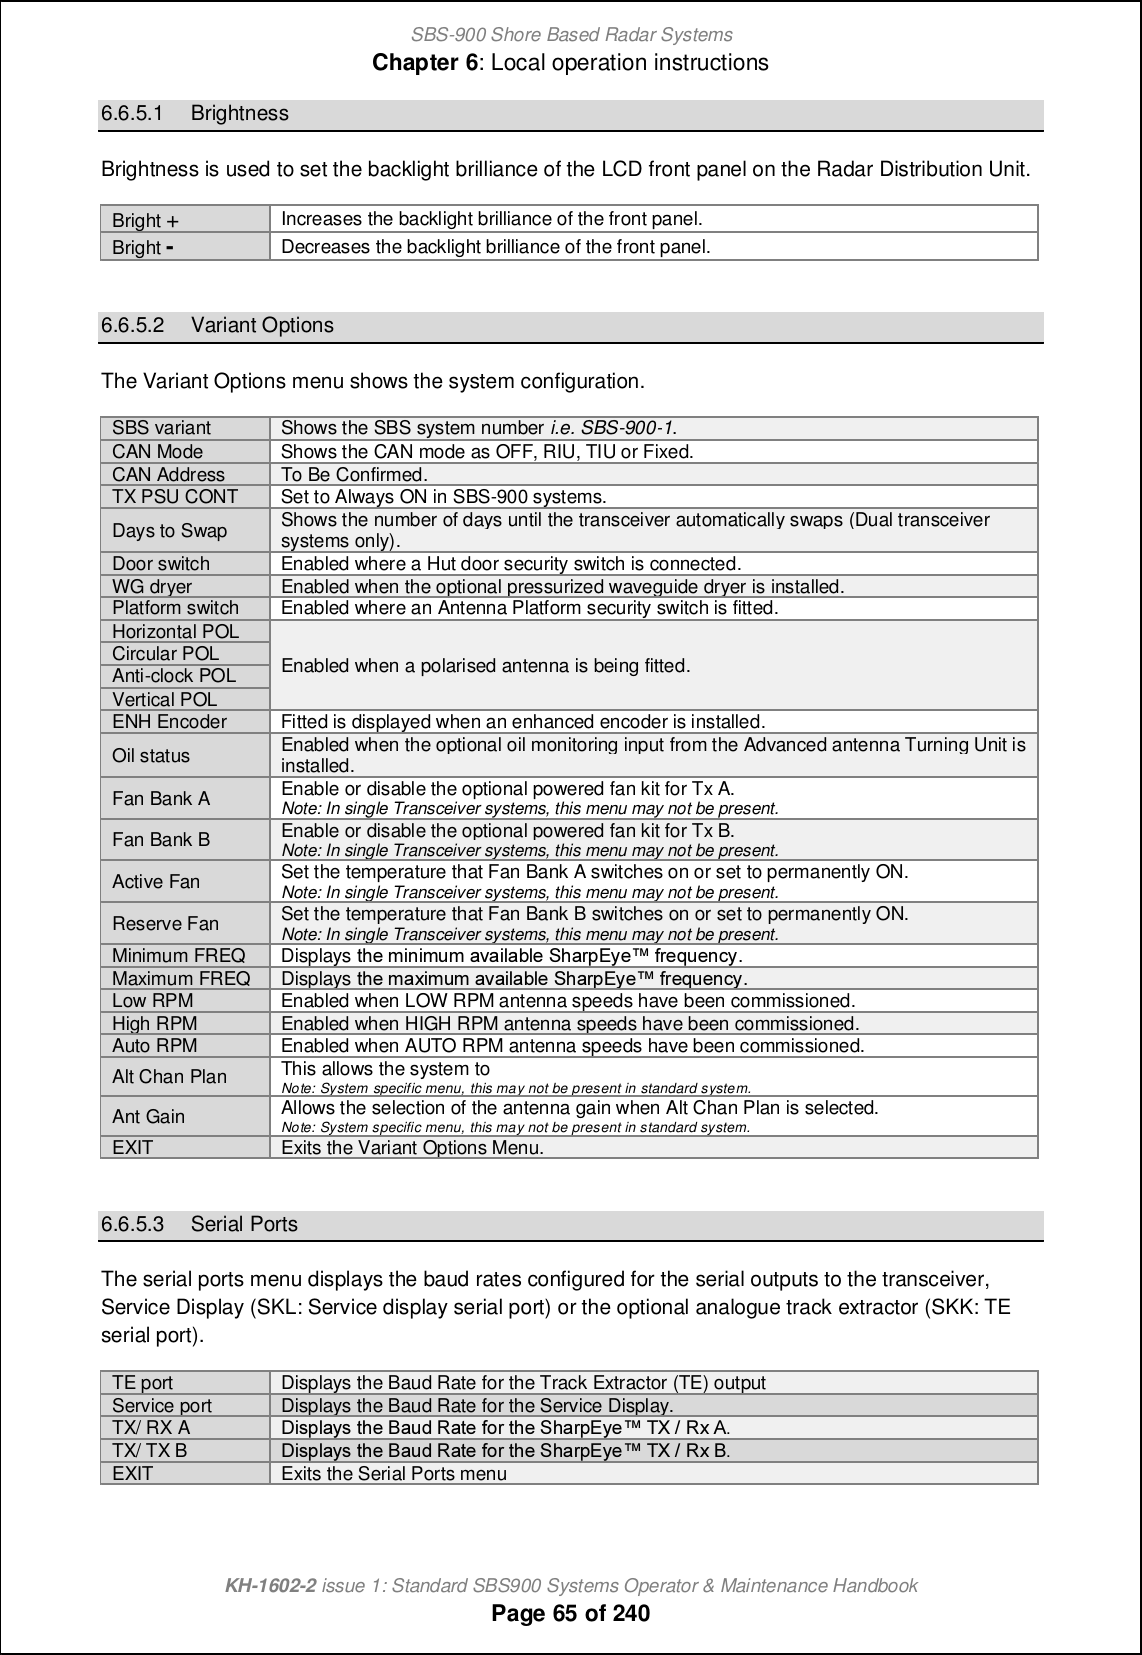 SBS-900 Shore Based Radar SystemsChapter 6: Local operation instructionsKH-1602-2 issue 1: Standard SBS900 Systems Operator &amp; Maintenance HandbookPage 65 of 2406.6.5.1 BrightnessBrightness is used to set the backlight brilliance of the LCD front panel on the Radar Distribution Unit.Bright+Increases the backlight brilliance of the front panel.Bright -Decreases the backlight brilliance of the front panel.6.6.5.2 Variant OptionsThe Variant Options menu shows the system configuration.SBS variant Shows the SBS system numberi.e.SBS-900-1.CAN Mode Shows the CAN mode as OFF, RIU, TIU or Fixed.CAN AddressTo Be Confirmed.TX PSU CONT Set to Always ON in SBS-900 systems.Days to Swap Shows the number of days until the transceiver automatically swaps (Dual transceiversystems only).Door switch Enabled where a Hut door security switch is connected.WG dryerEnabled when the optionalpressurized waveguide dryer isinstalled.Platform switch Enabled where an Antenna Platform security switch is fitted.Horizontal POLEnabled when a polarised antenna is being fitted.Circular POLAnti-clock POLVertical POLENH Encoder Fitted is displayed when an enhanced encoder is installed.Oil status Enabled when the optional oil monitoring input from the Advanced antenna Turning Unit isinstalled.Fan Bank A Enable or disable the optional powered fan kit for Tx A.Note: In single Transceiver systems, this menu may not be present.Fan Bank B Enable or disable the optional powered fan kit for Tx B.Note: Insingle Transceiver systems, this menu may not be present.Active Fan Set the temperature that Fan Bank A switches on or set to permanently ON.Note: In single Transceiver systems, this menu may not be present.Reserve Fan Set the temperature that Fan Bank B switches on or set to permanently ON.Note: In single Transceiver systems, this menu may not be present.Minimum FREQ Displays nb_ gchcgog [p[cf[\f_ Rb[ljDs_x `l_ko_h]s.Maximum FREQDisplaysnb_ g[rcgog [p[cf[\f_ Rb[ljDs_x `l_ko_h]s.Low RPM Enabled when LOW RPM antenna speeds have been commissioned.High RPMEnabled when HIGH RPM antenna speeds have been commissioned.Auto RPM Enabled when AUTO RPM antenna speeds have been commissioned.Alt Chan Plan This allows the system toNote: Systemspecific menu, this may not be present in standard system.Ant Gain Allows the selection of the antenna gain when Alt Chan Plan is selected.Note: System specific menu, this may not be present in standard system.EXITExits the Variant Options Menu.6.6.5.3 Serial PortsThe serial ports menu displays the baud rates configured for the serial outputs to the transceiver,Service Display (SKL: Service display serial port) or the optional analogue track extractor (SKK: TEserial port).TE port Displays the Baud Rate for the Track Extractor (TE) outputService portDisplays the Baud Rate for the Service Display.TX/ RX A Ccmjf[sm nb_ A[o^ Q[n_ `il nb_ Rb[ljDs_x SW . Qr @-TX/ TX BCcmjf[sm nb_ A[o^ Q[n_ `il nb_ Rb[ljDs_x SW . Qr A-EXITExits the Serial Ports menu